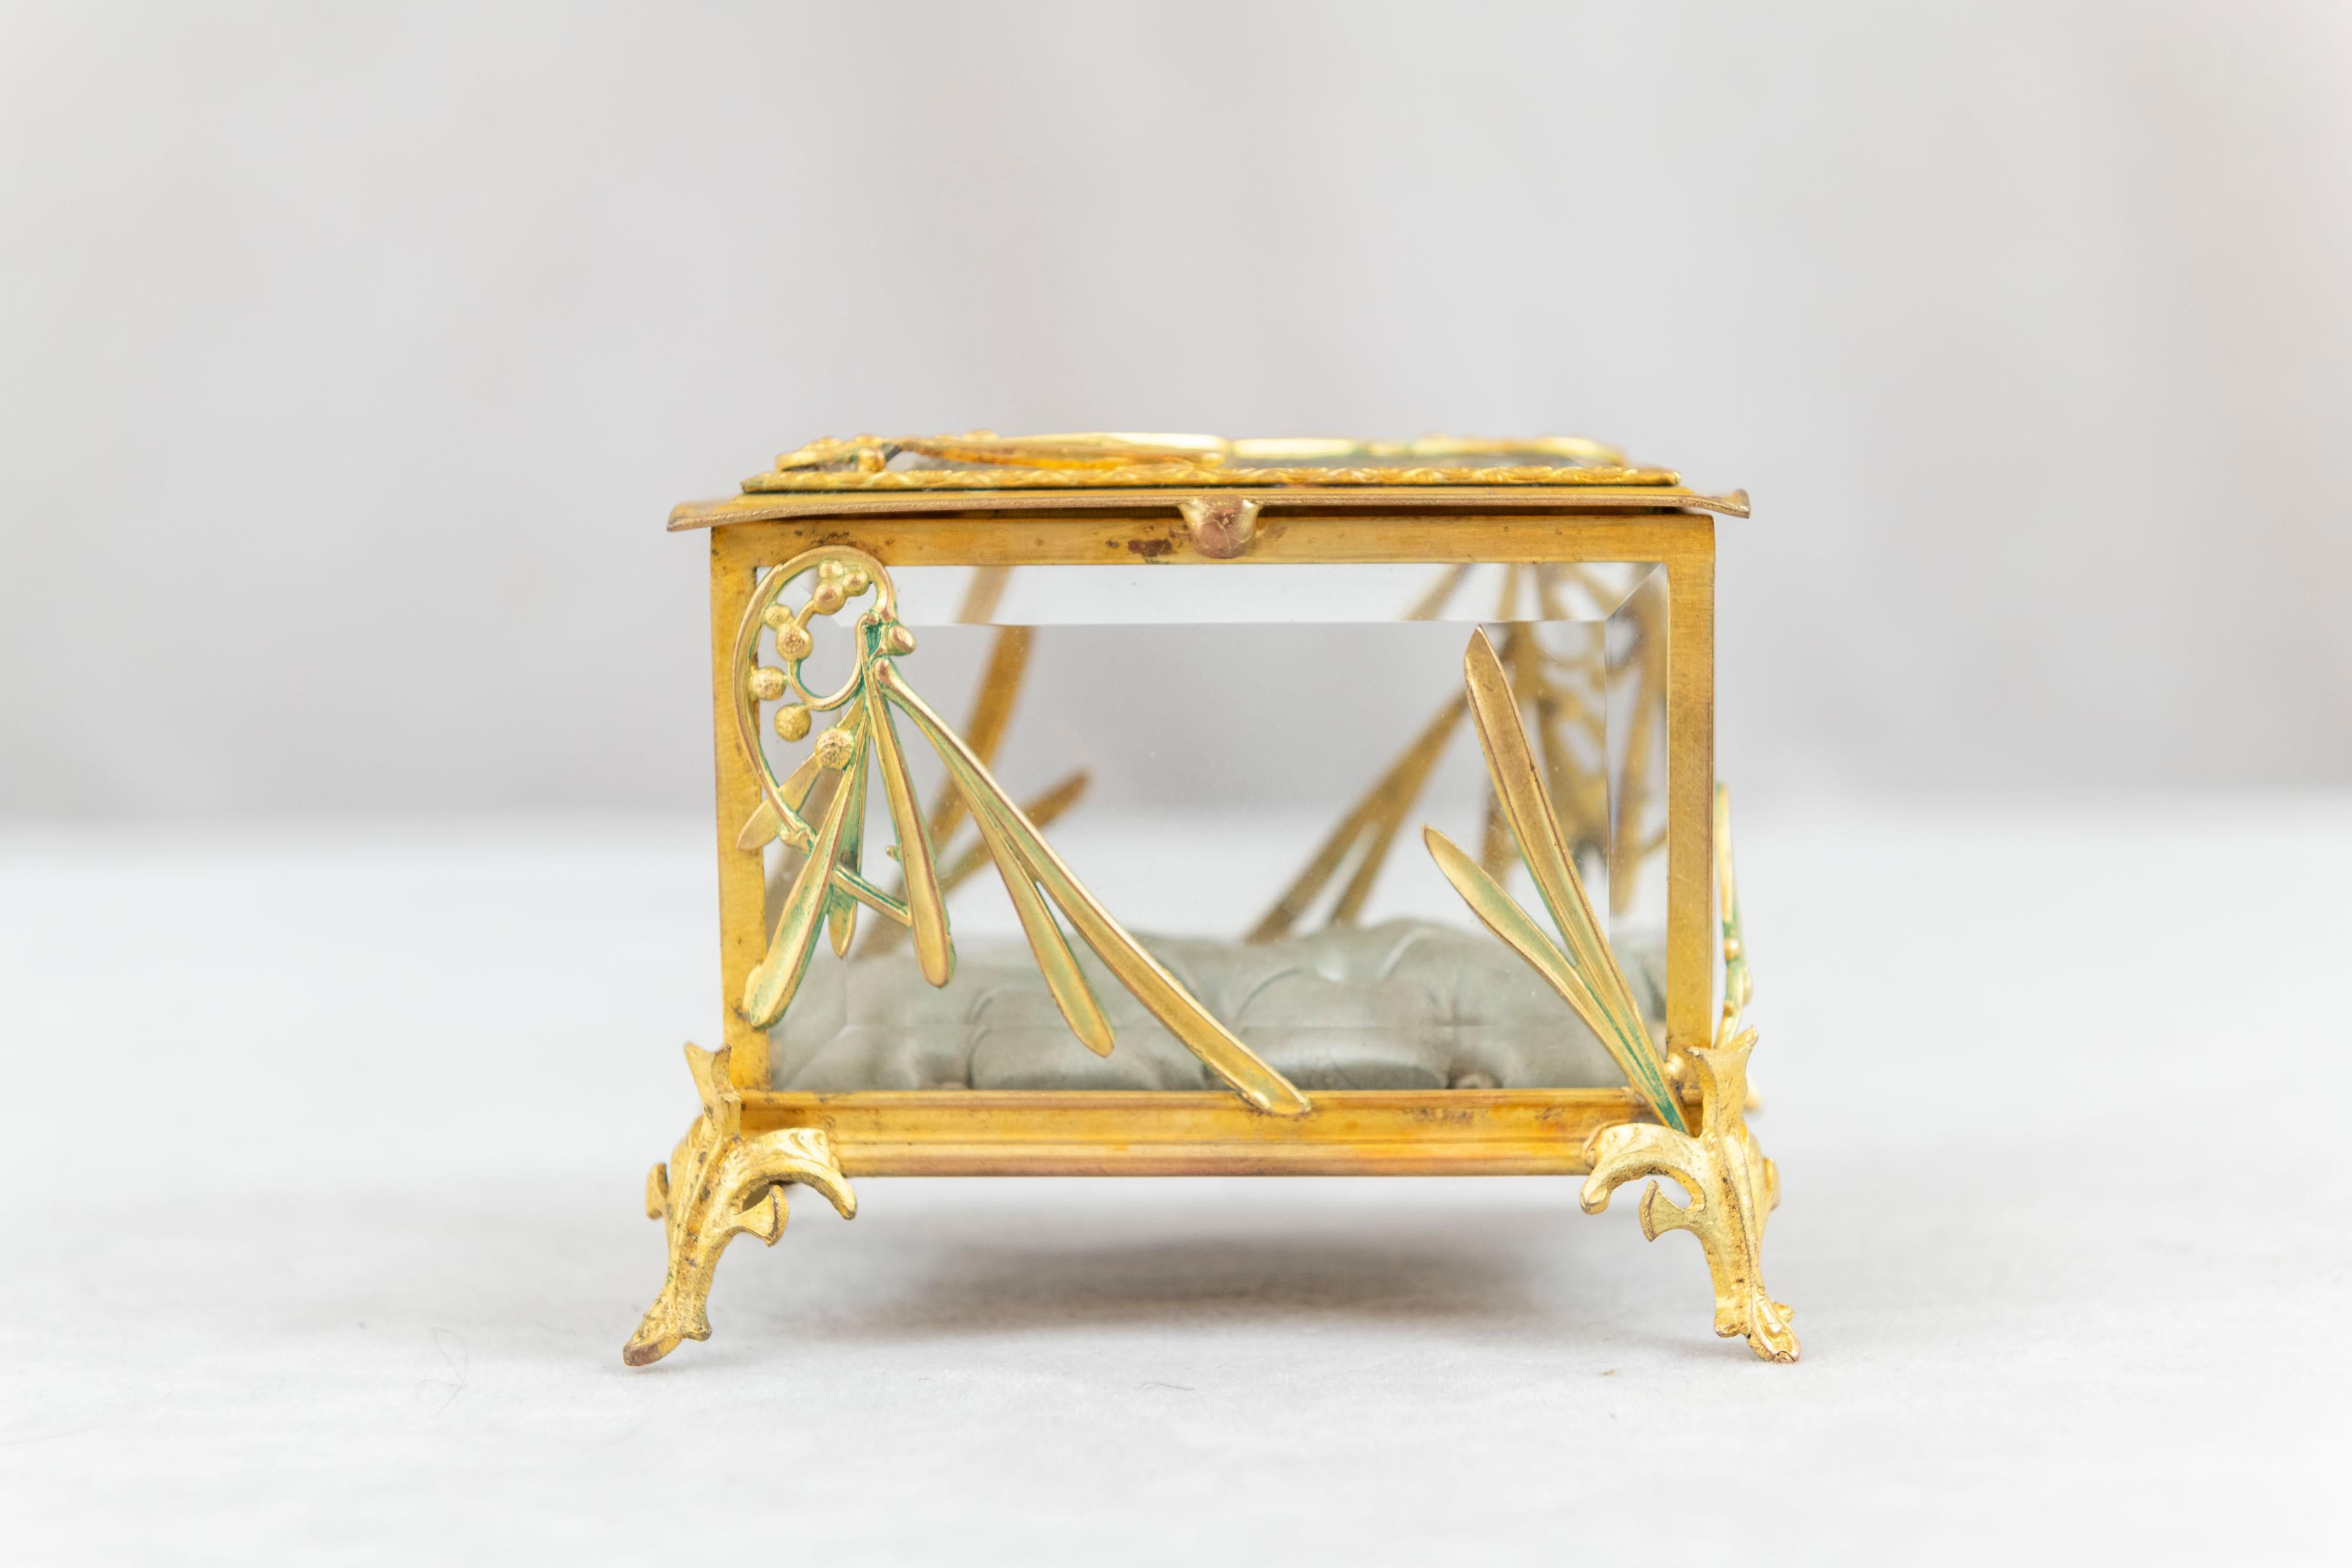 20th Century Art Nouveau Jewelry/Ring Box, French, Gilt Bronze, Beveled Glass, ca. 1910 For Sale